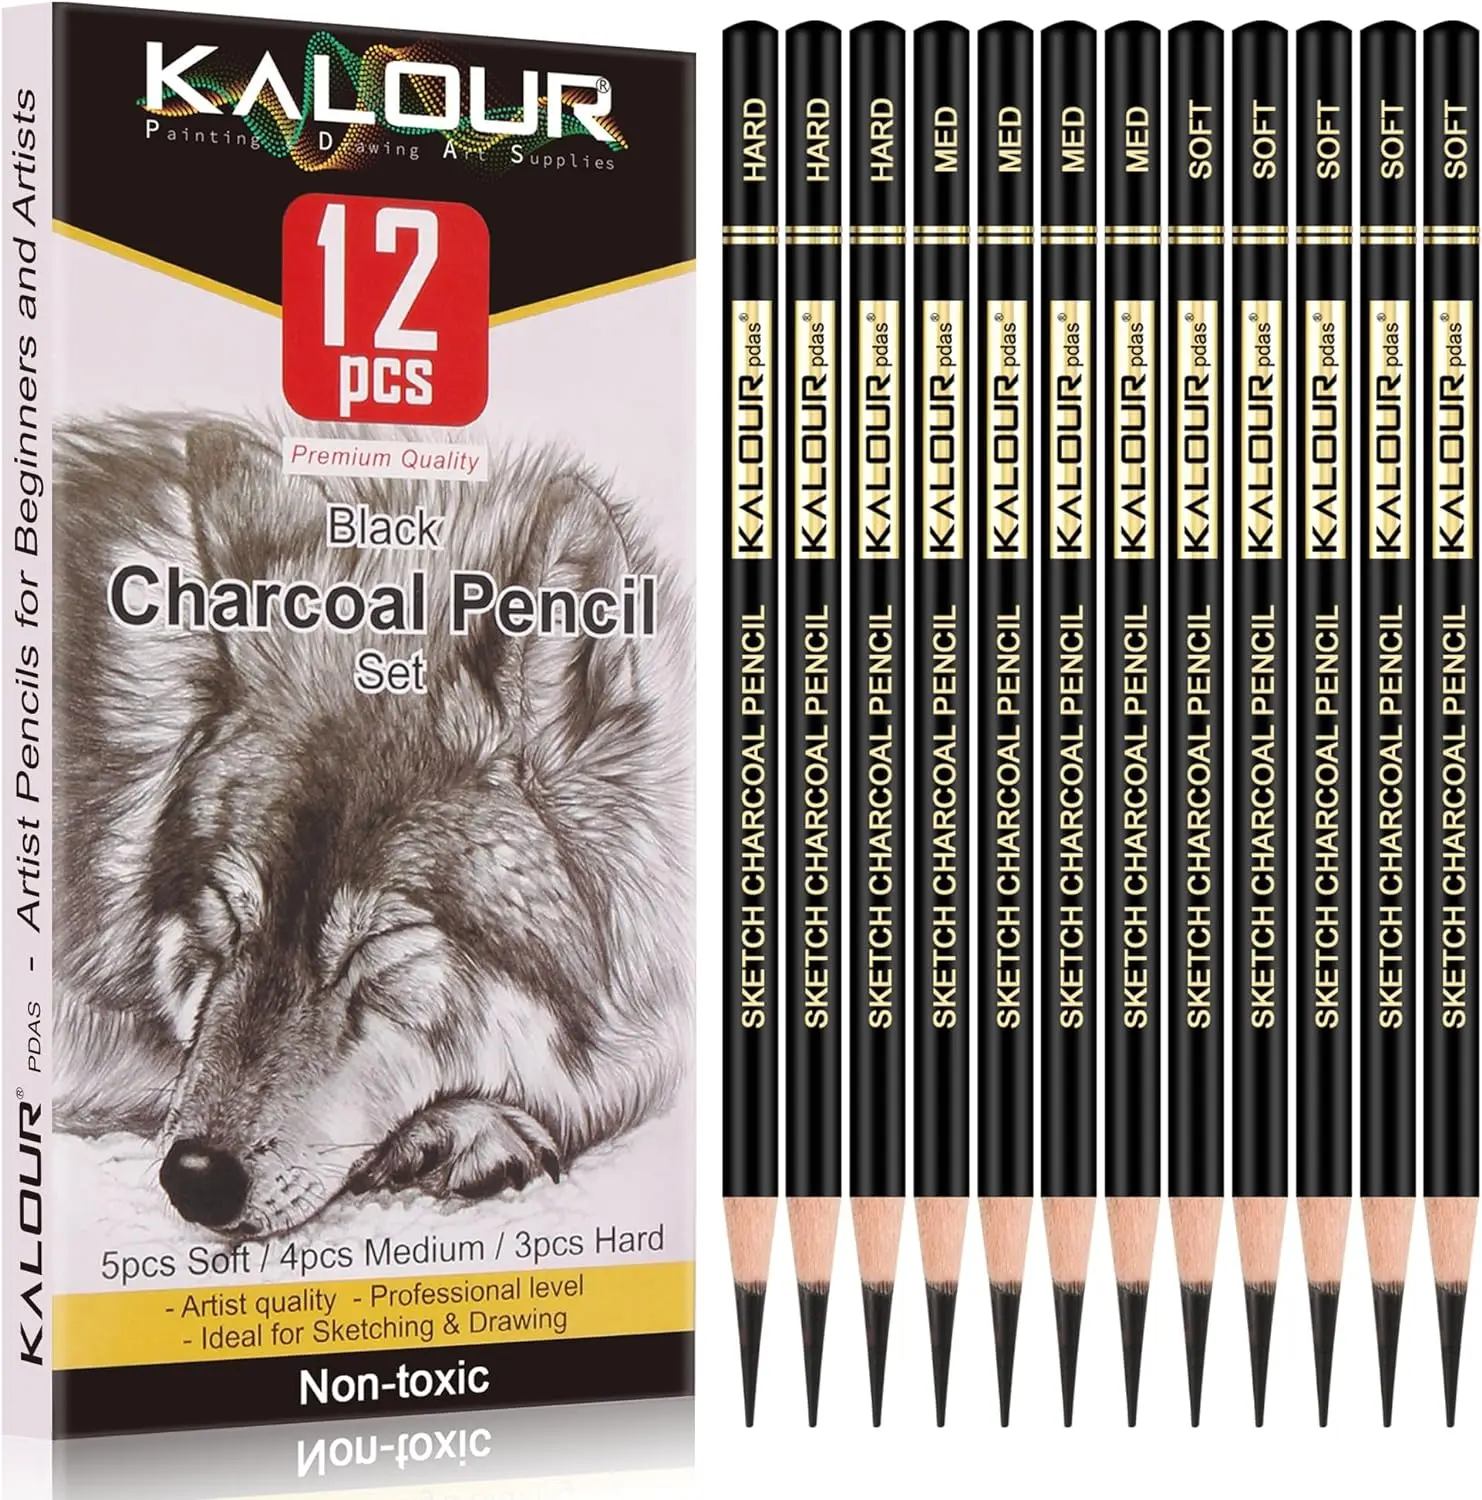 Professional Charcoal Pencils Drawing Set -12 Pieces Soft, Medium and Hard Charcoal Pencils for Drawing, Sketching, Shading, Art 6pcs set white charcoal pencils 4mm lead core soft medium highlight processing rendering for art sketching drawing stationery